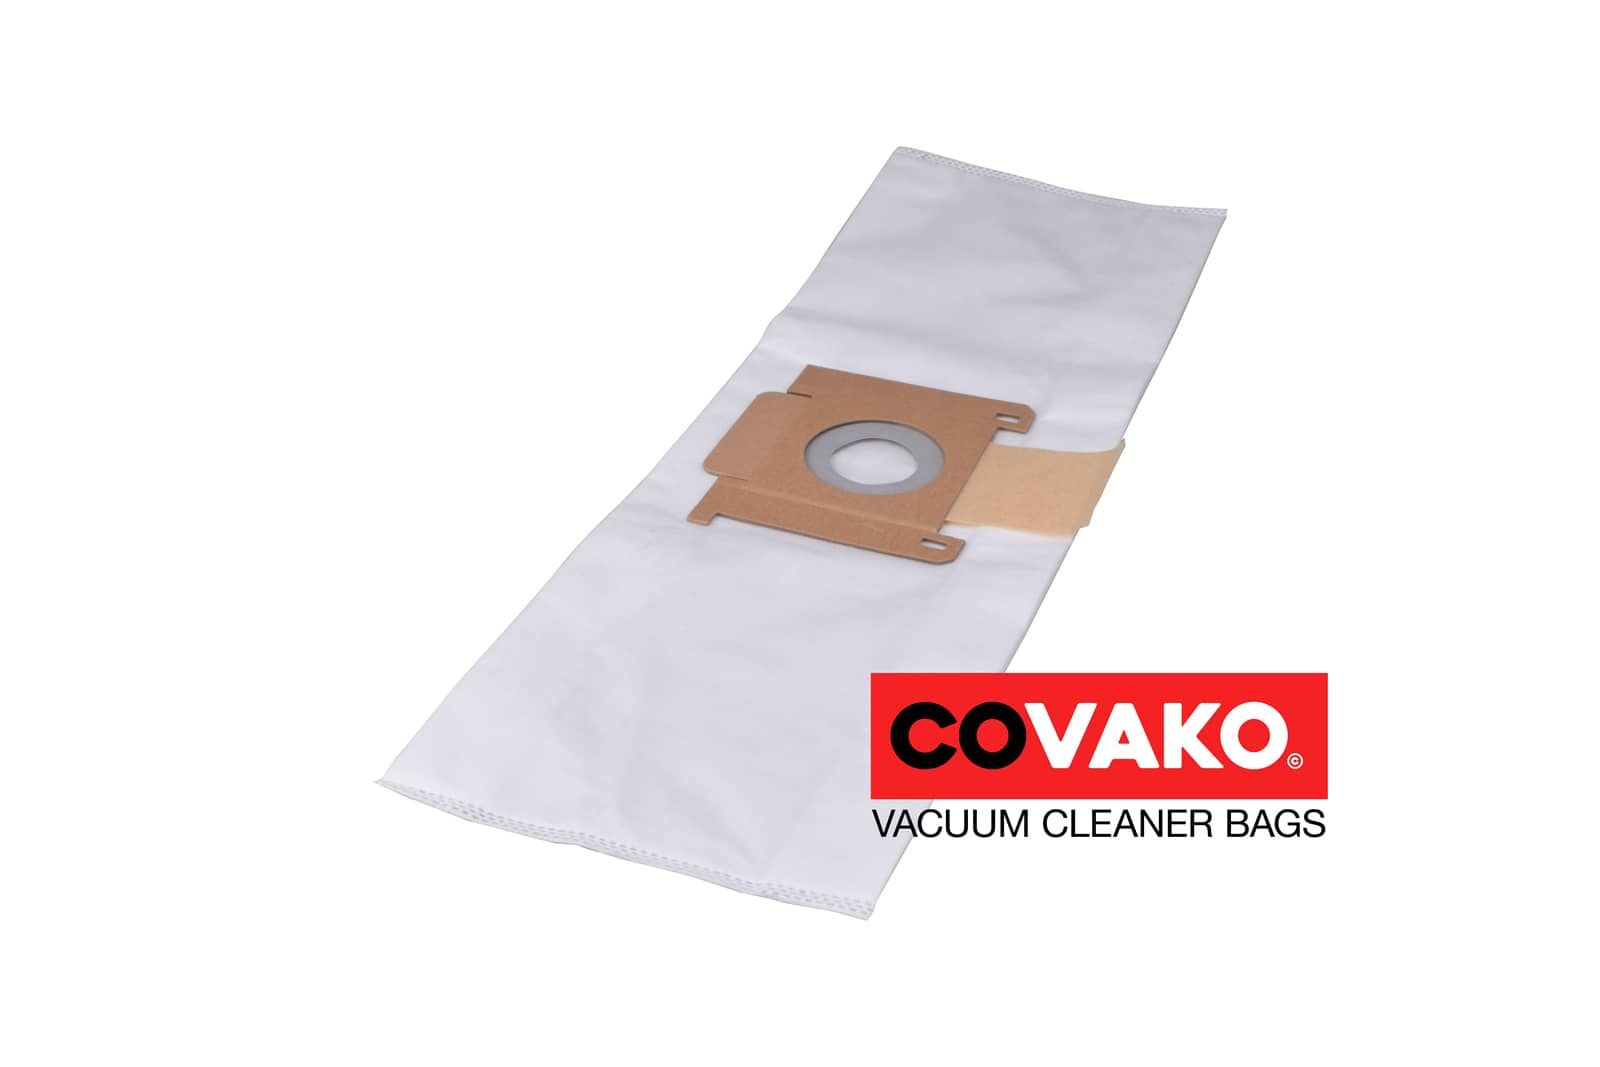 Fast Hi-Filtration 6.0 / Synthesis - Fast vacuum cleaner bags